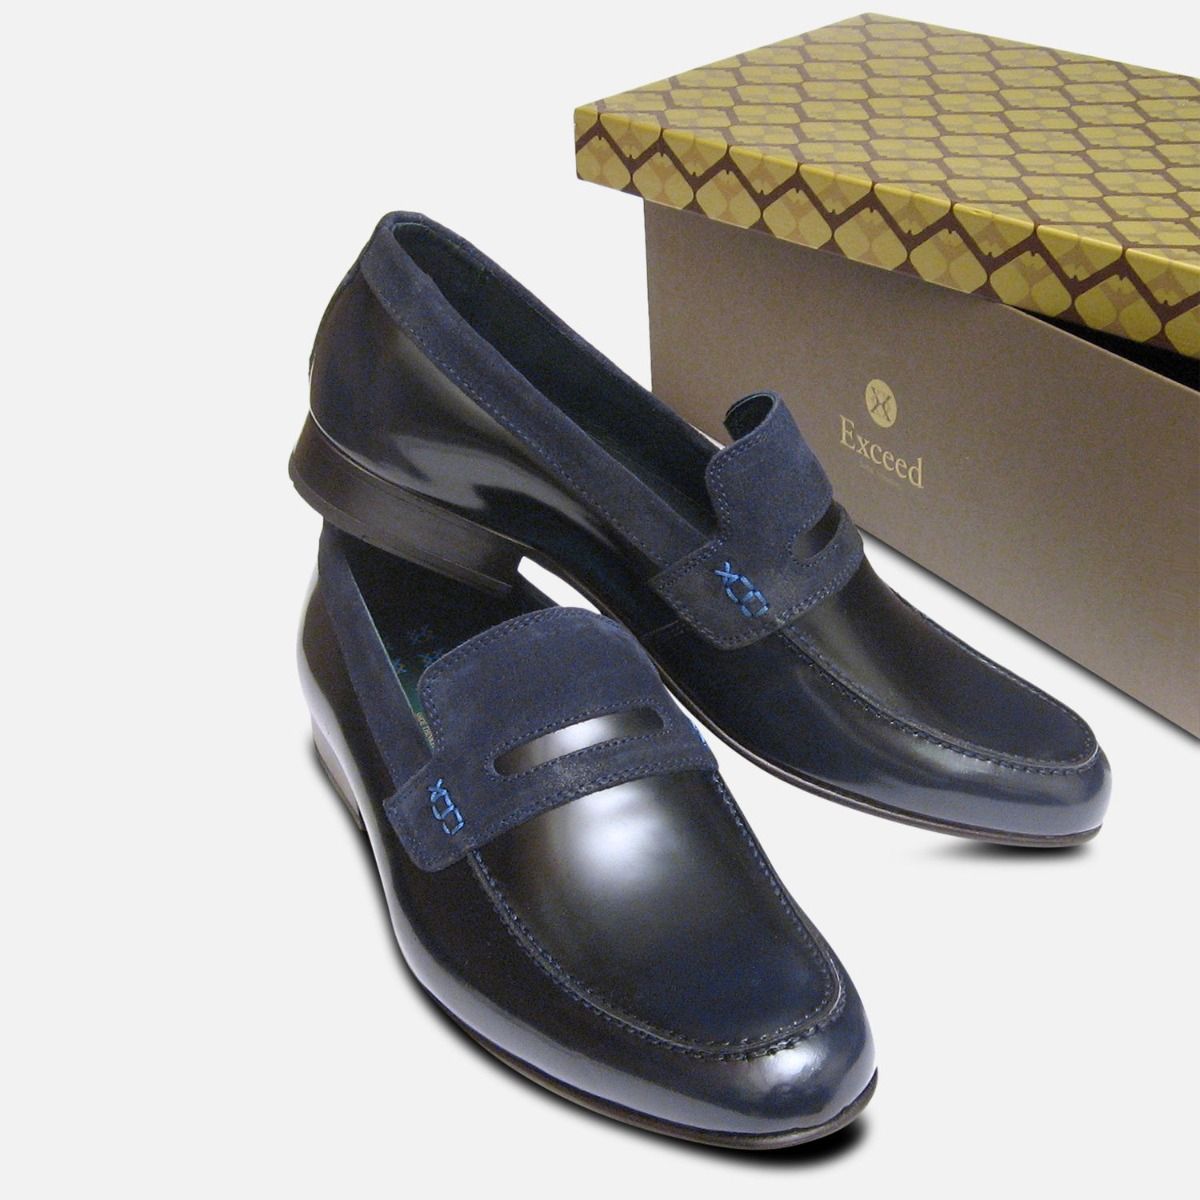 mens blue loafers